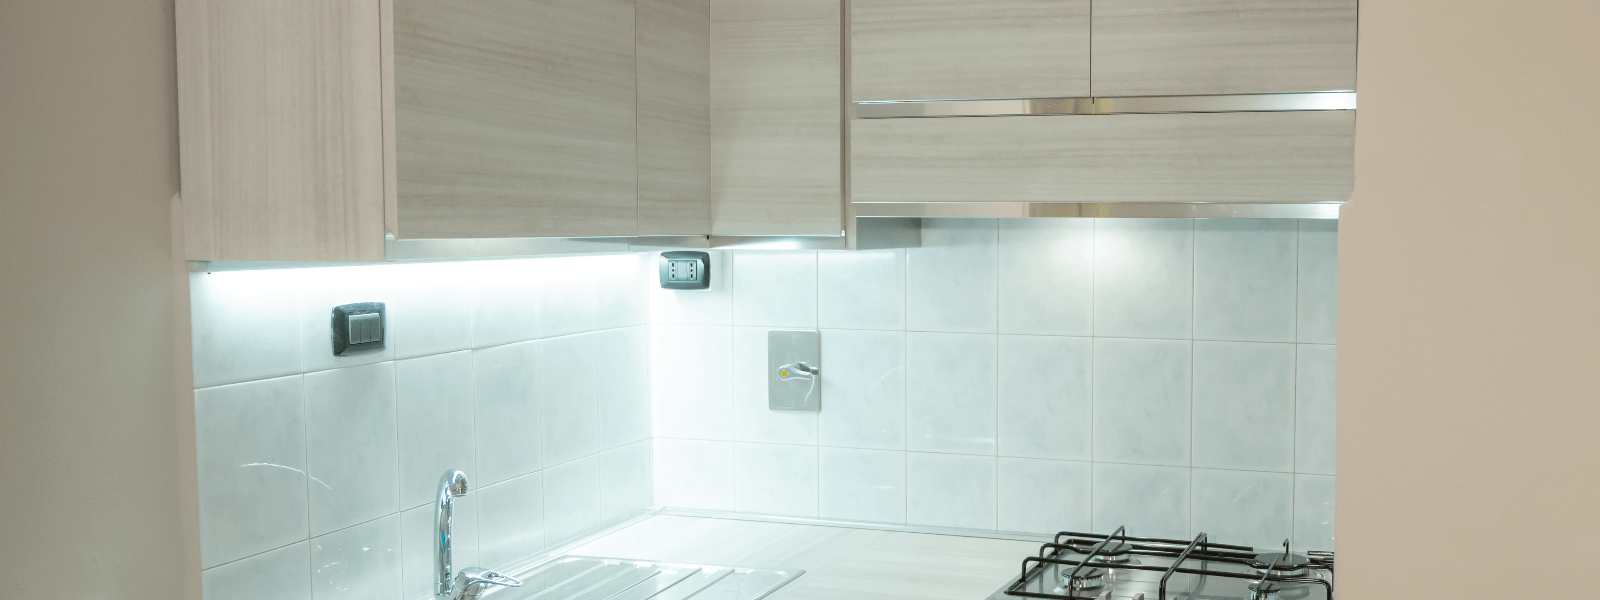 White under-cabinet lighting shown in kitchen with white splashback and light wood cabinets.